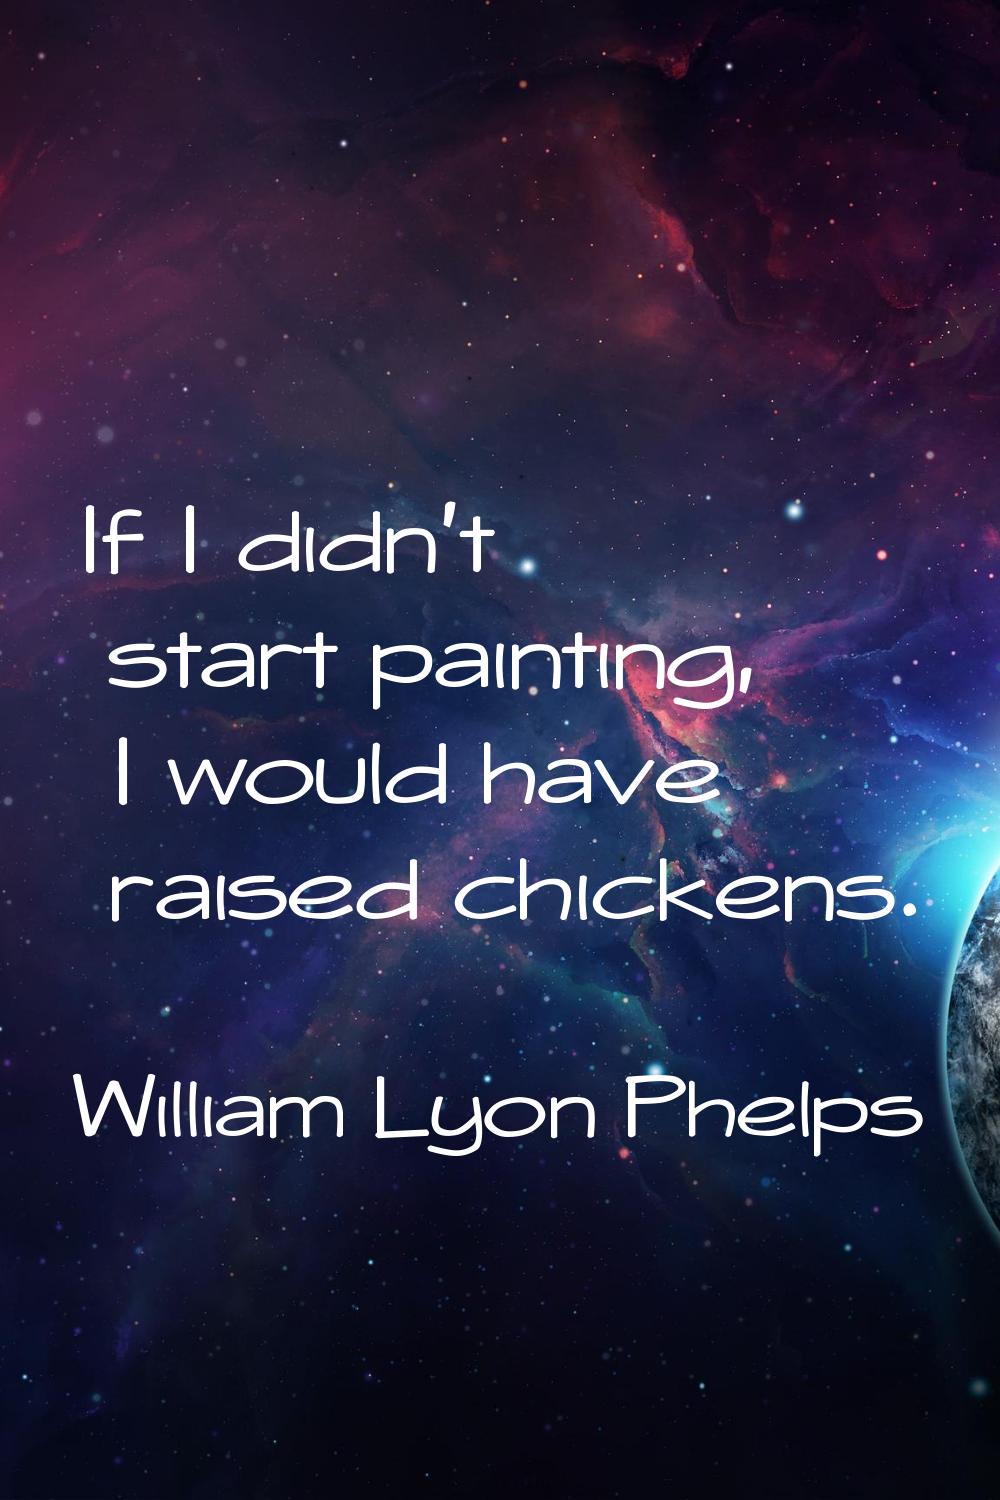 If I didn't start painting, I would have raised chickens.